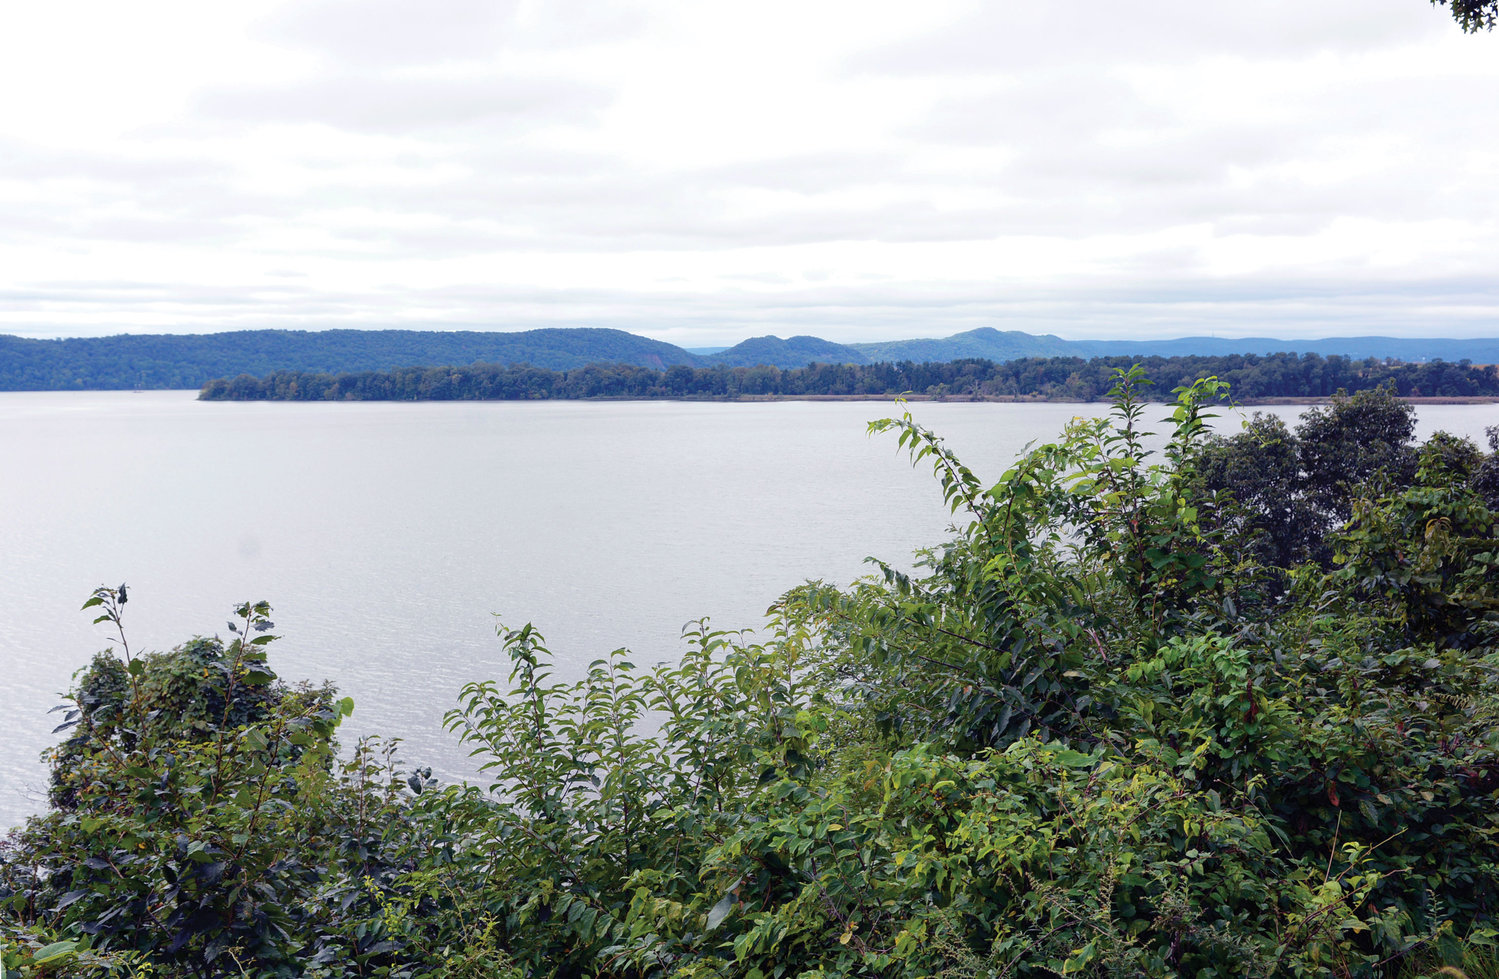 A view beyond the trees at Mariandale shows the Hudson River and the landscape of Rockland County.